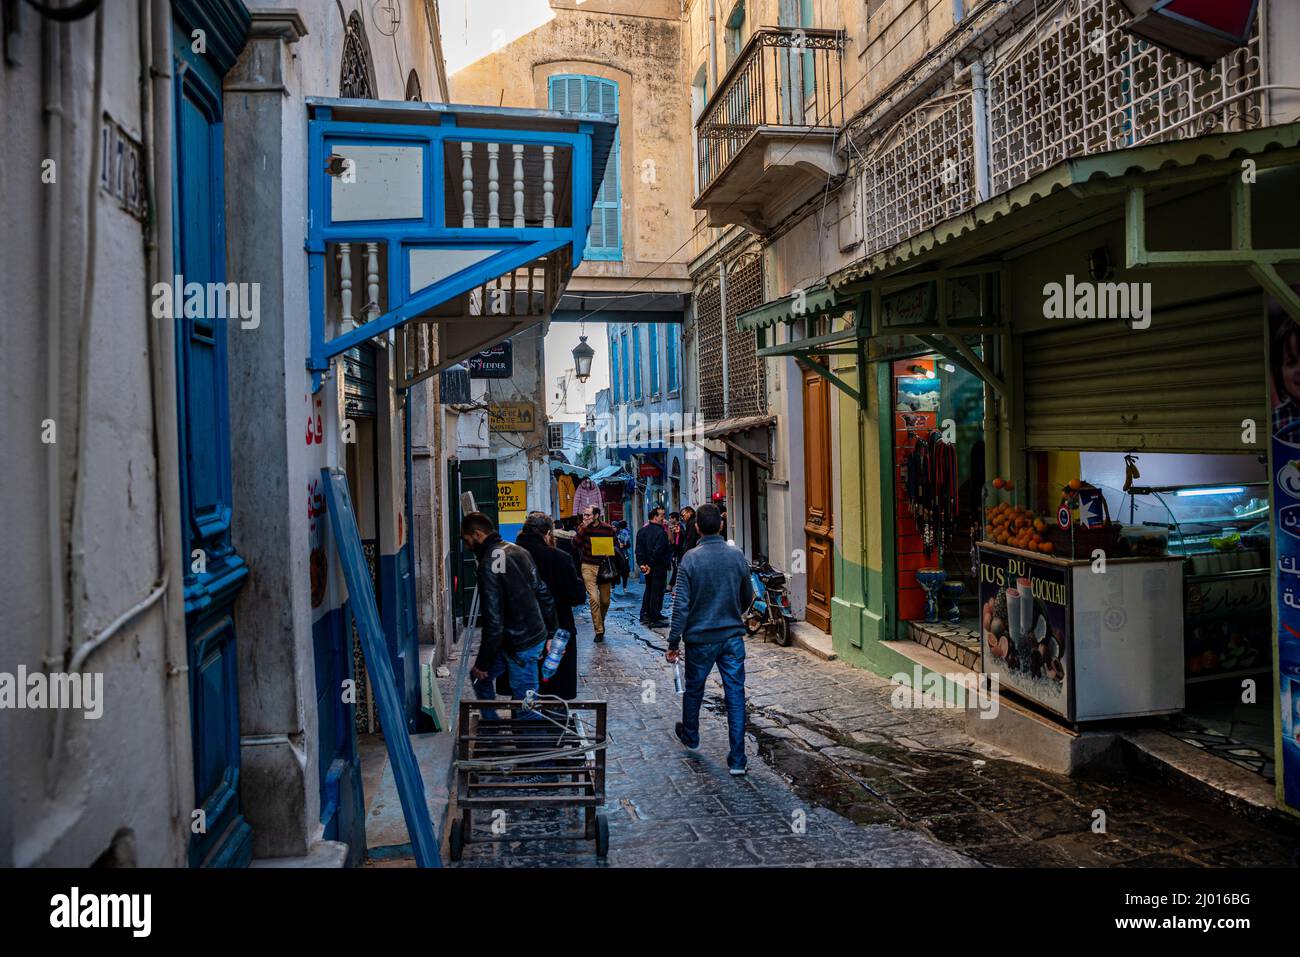 Crowded pedestrian alleway in medina (old town) of Tunis, Tunisia Stock Photo